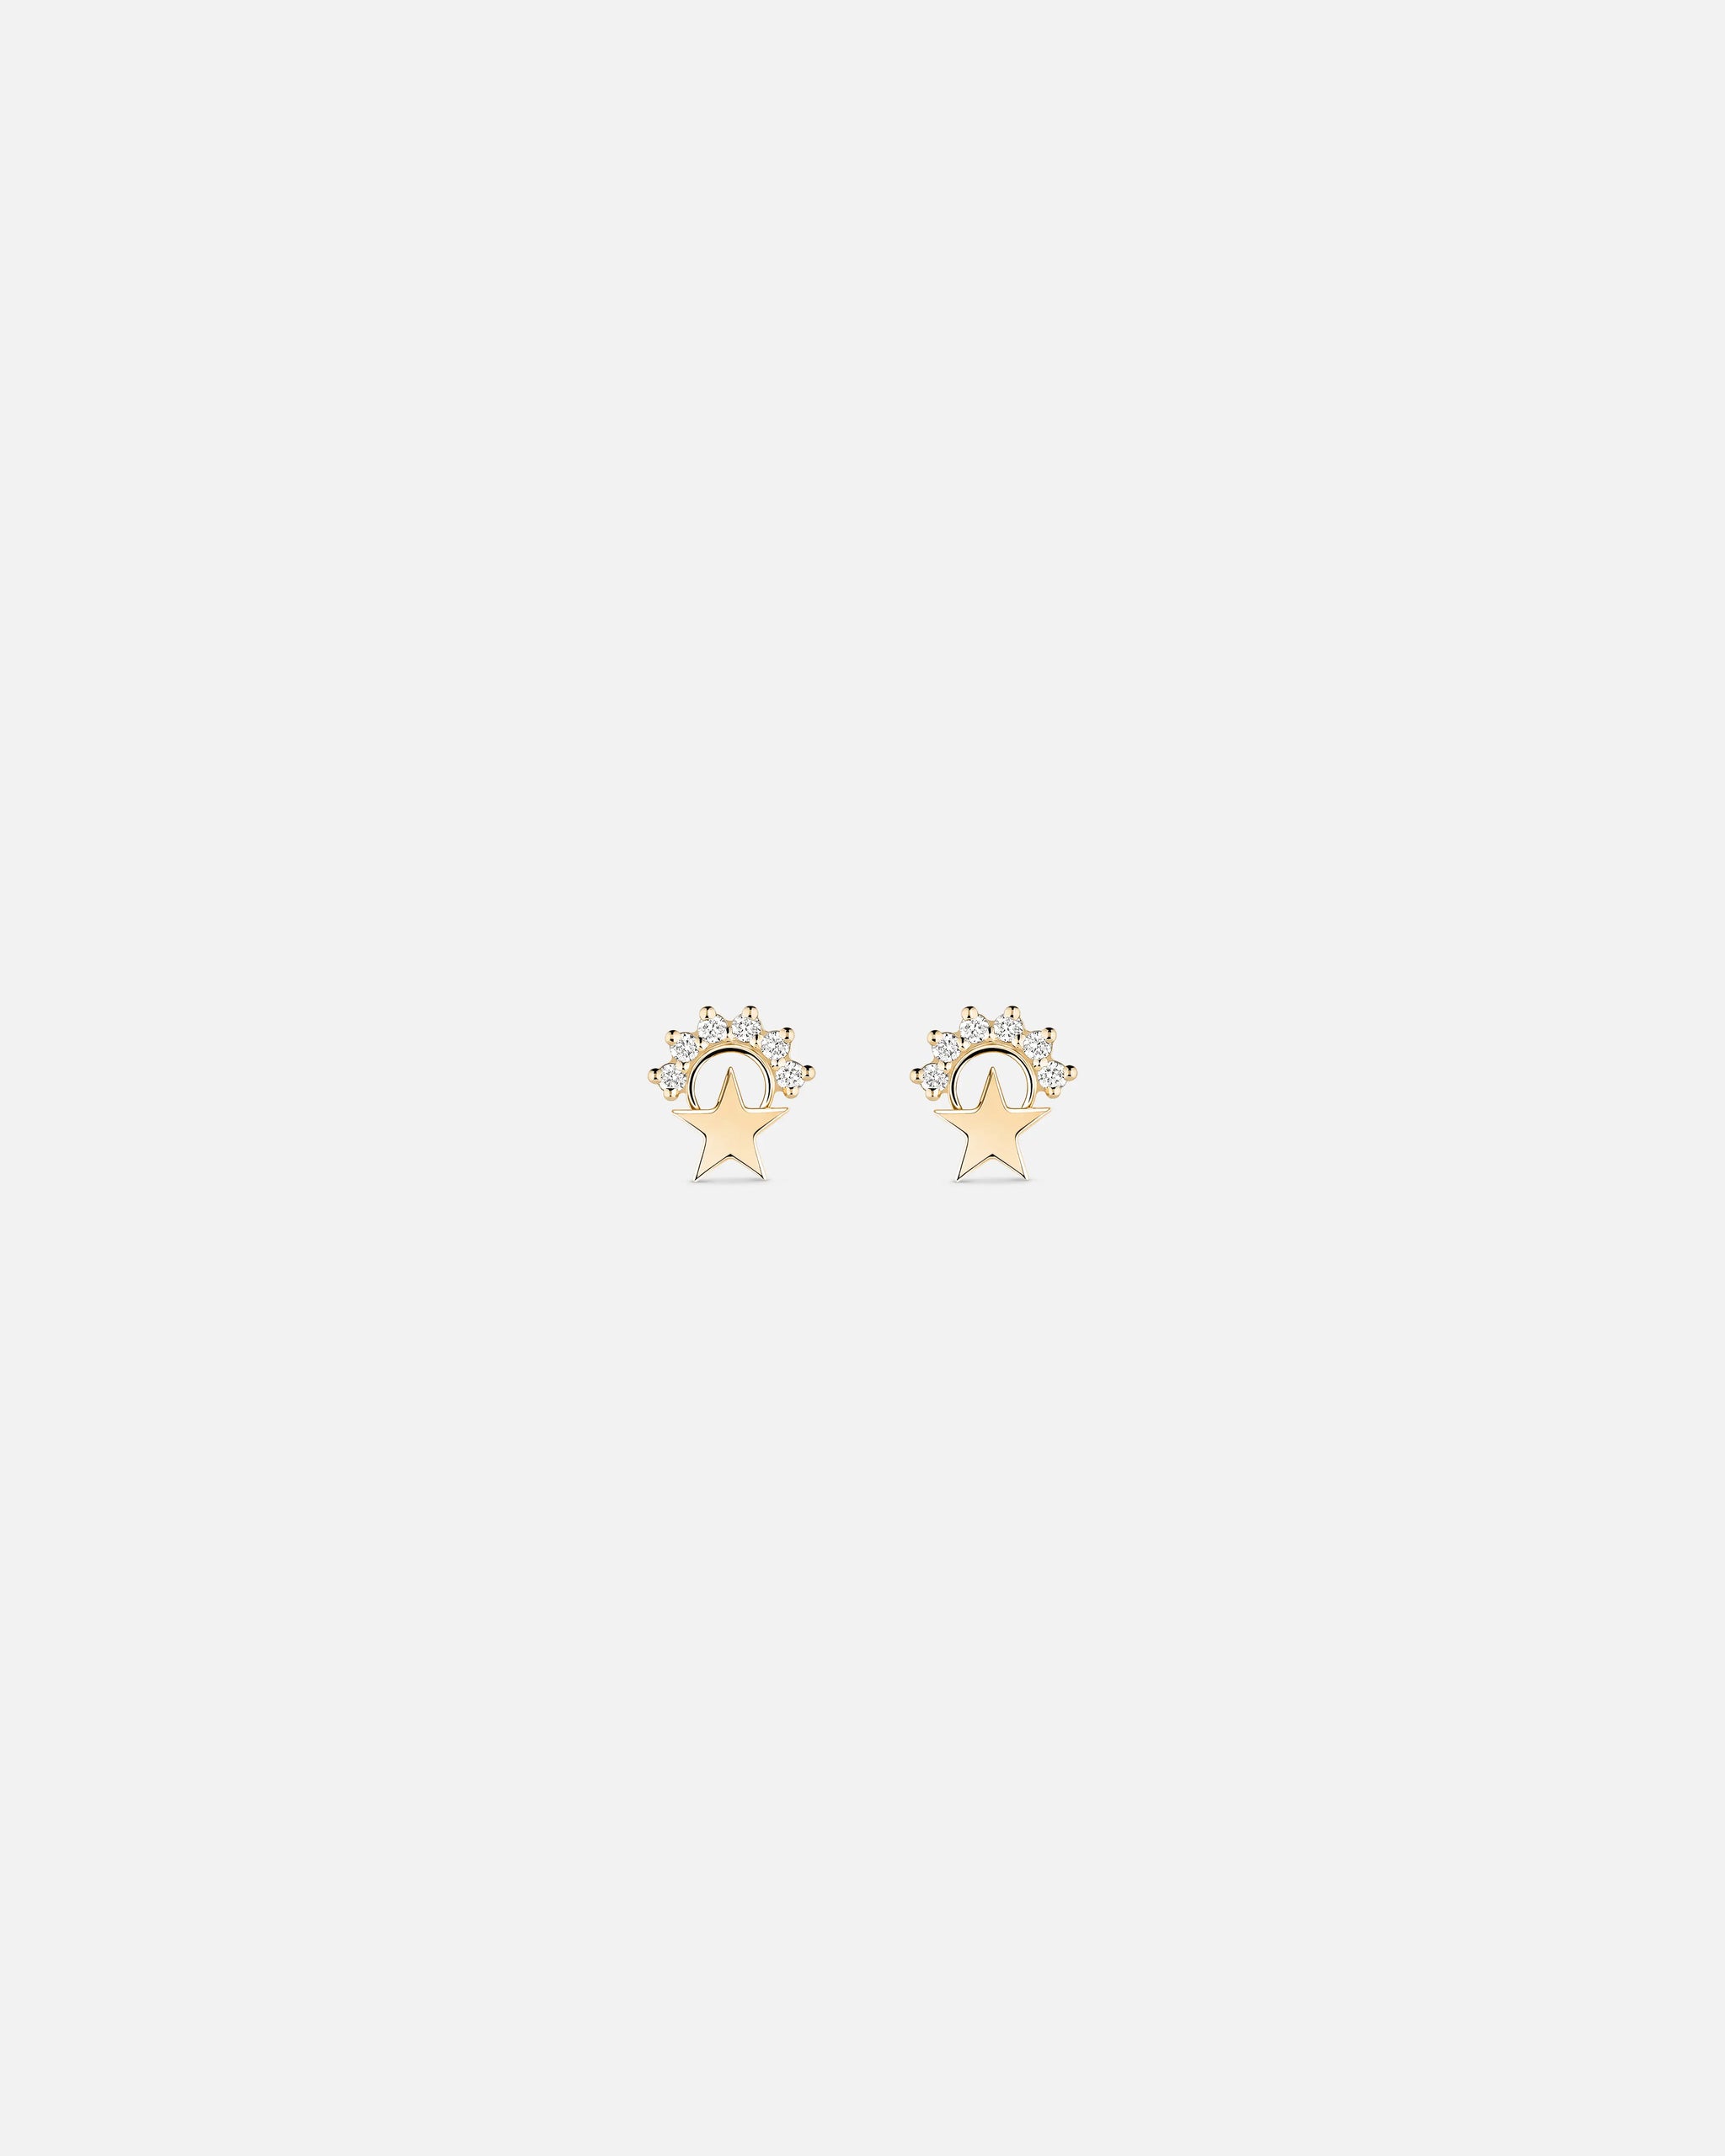 Star Studs in Yellow Gold - 1 - Nouvel Heritage